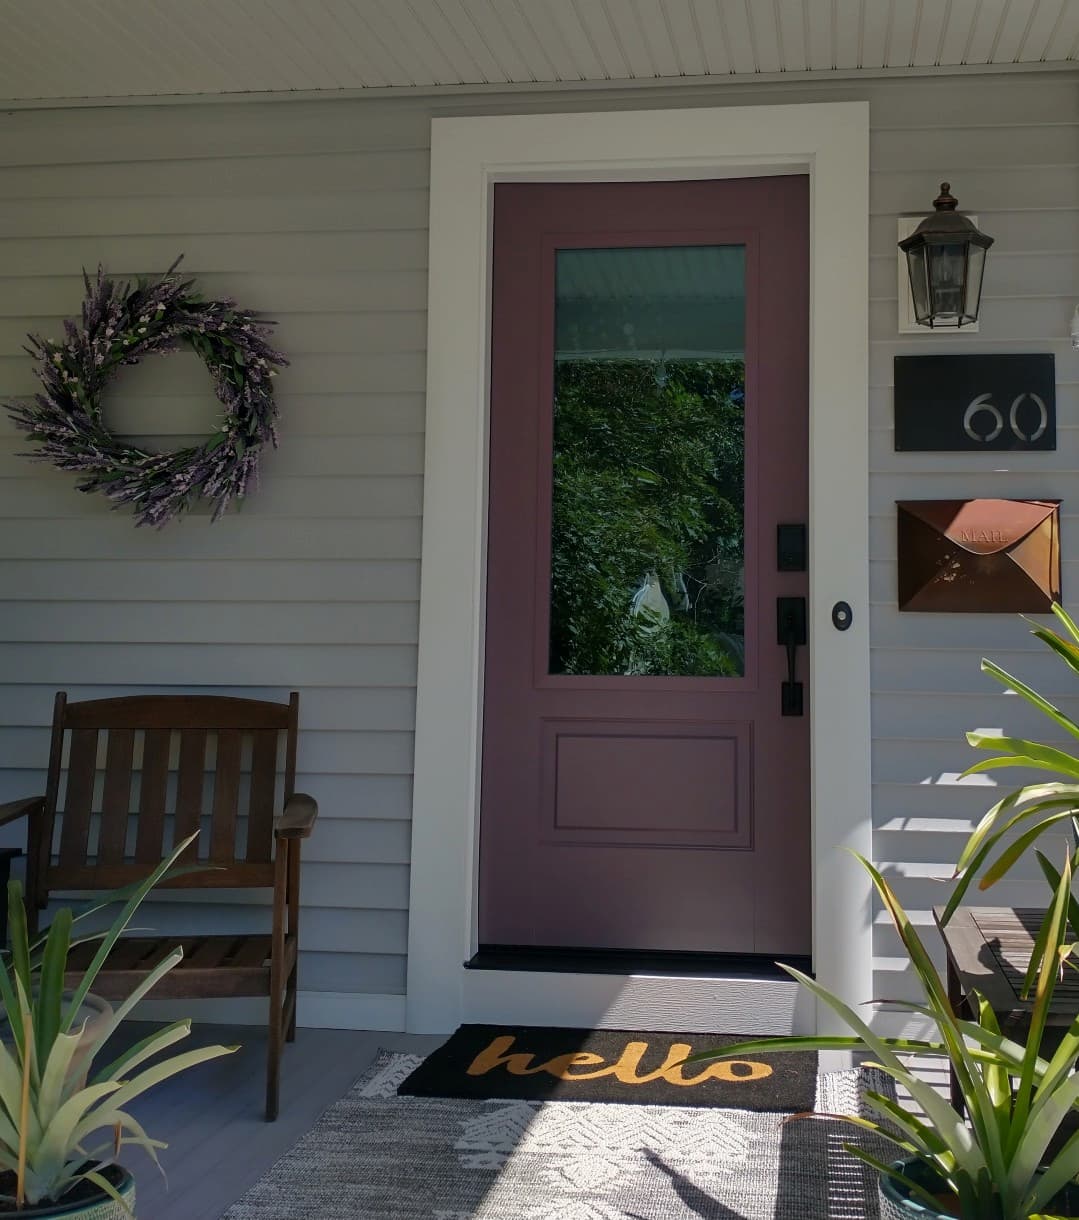 New purple firberglass entry door with 3/4 glass panel and black hardware